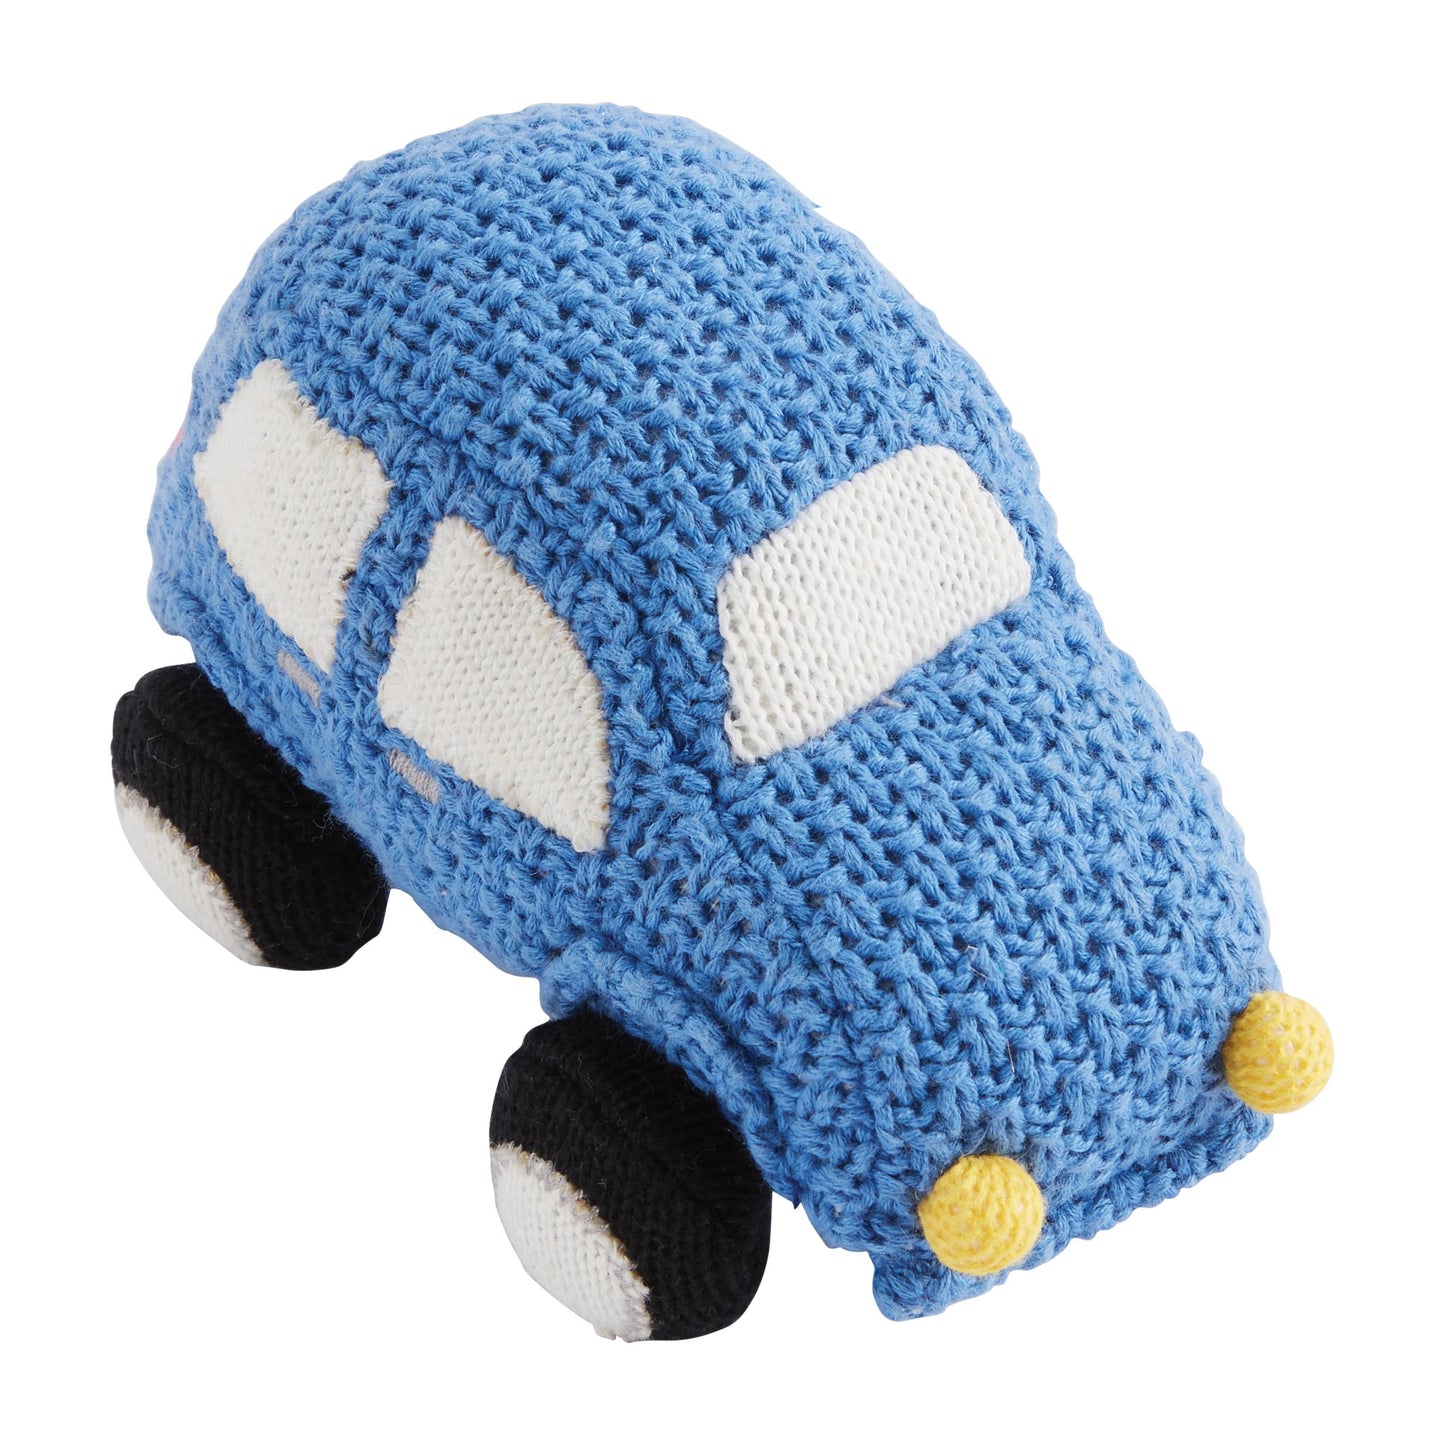 Car Knit Rattle Gifts Mudpie   